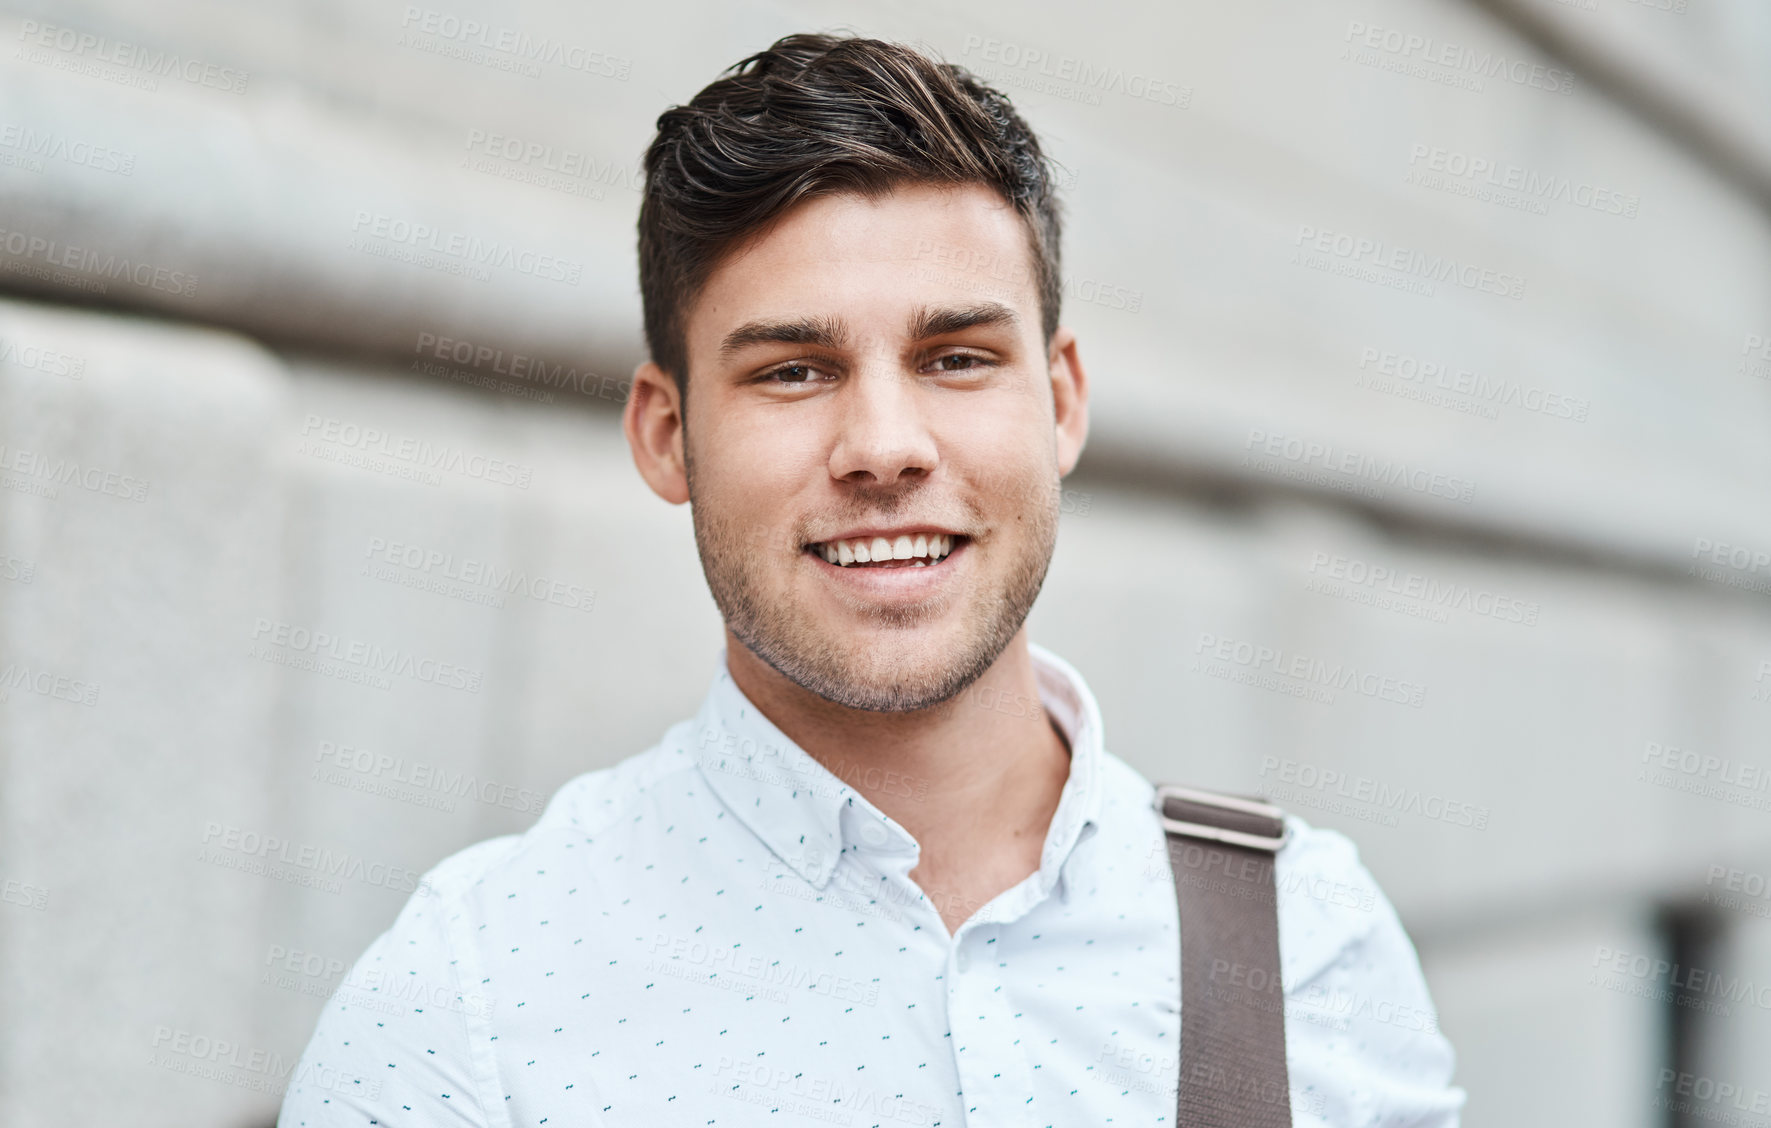 Buy stock photo Face of a happy, smiling and professional business man, entrepreneur or employee standing in the city. Portrait headshot of a charming male businessperson or guy looking confident in an urban town